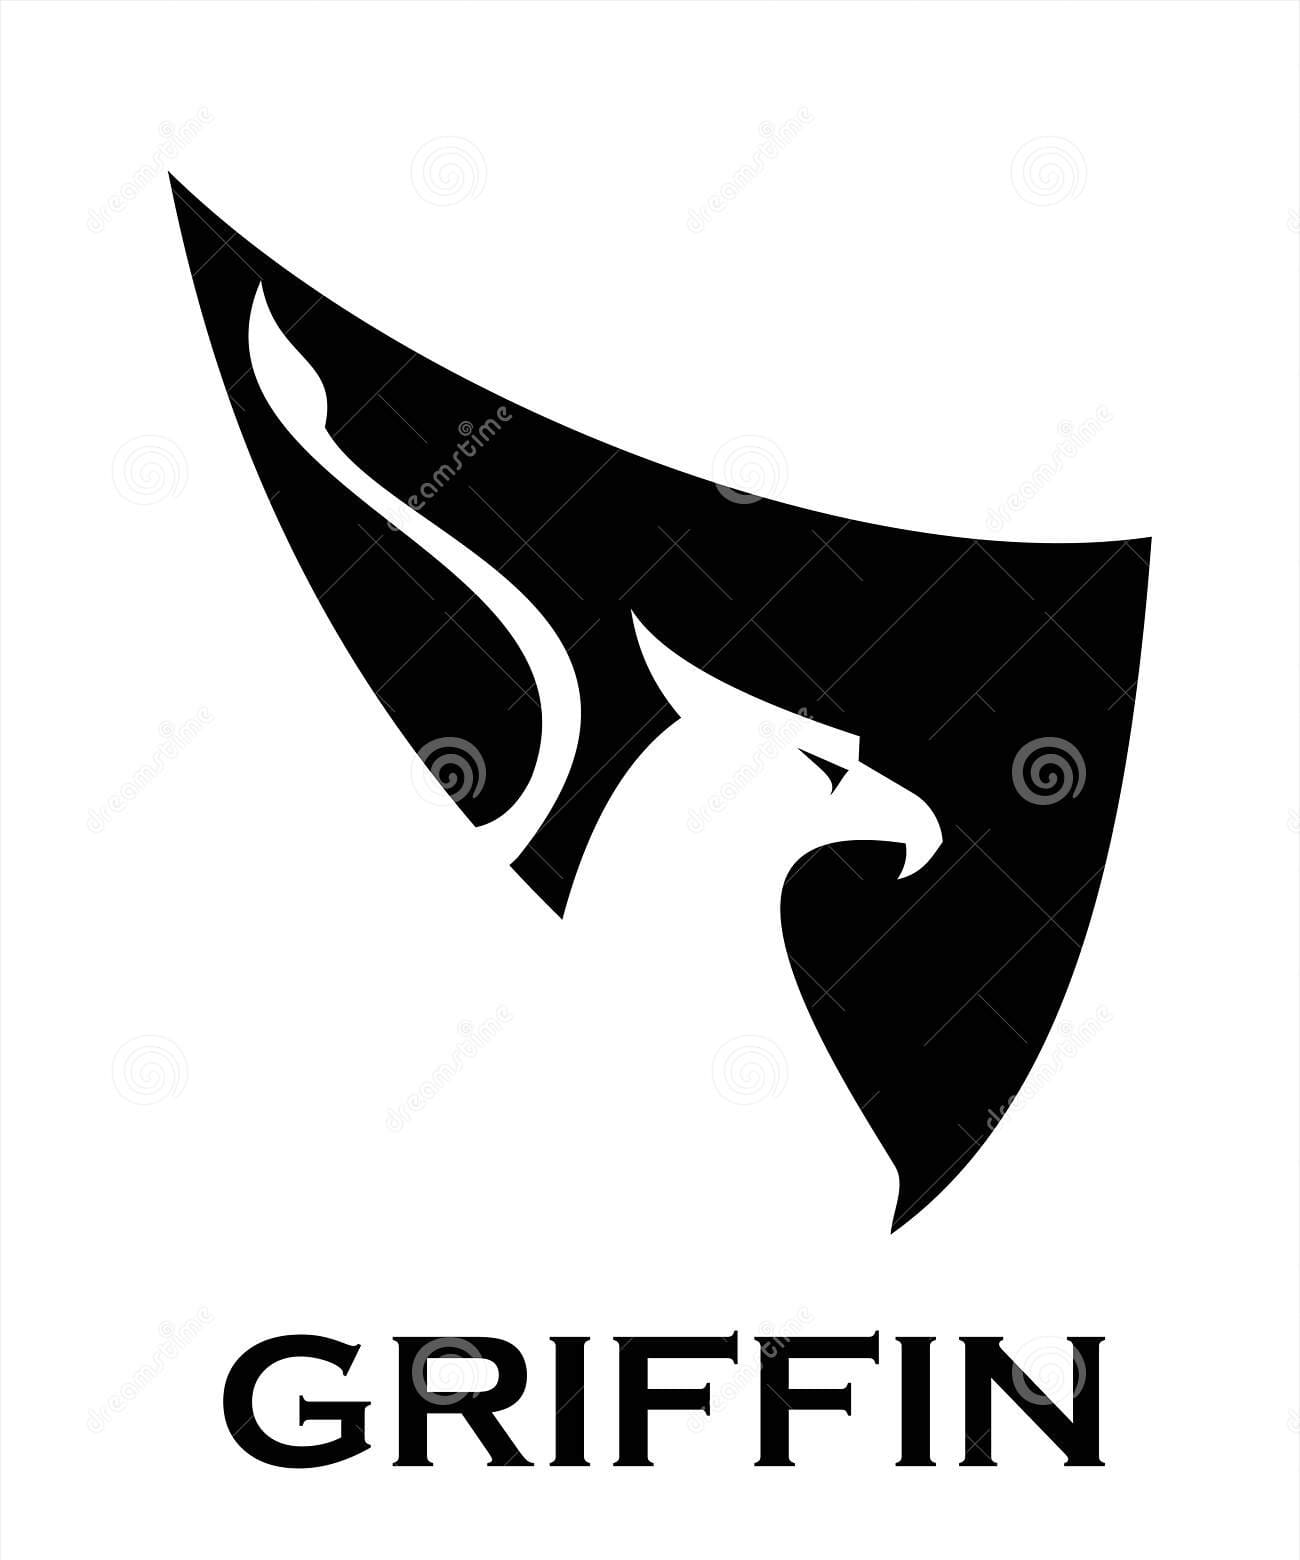 Griffin Black And White